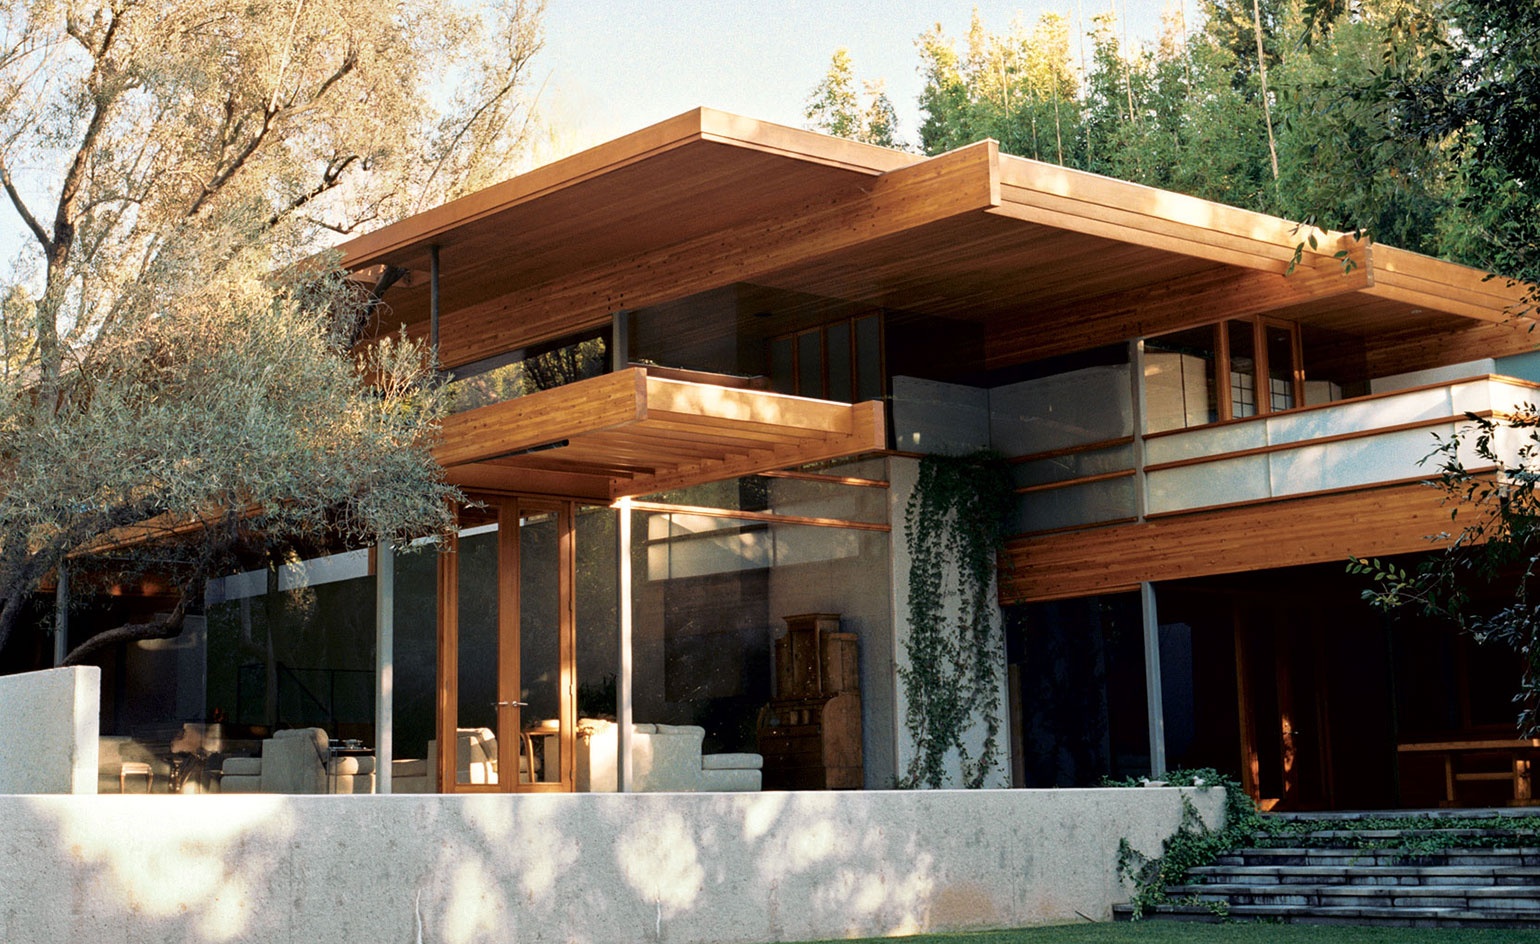 ned skipper blanding Ray Kappe's duo of houses pair modernist and organic ideas | Wallpaper